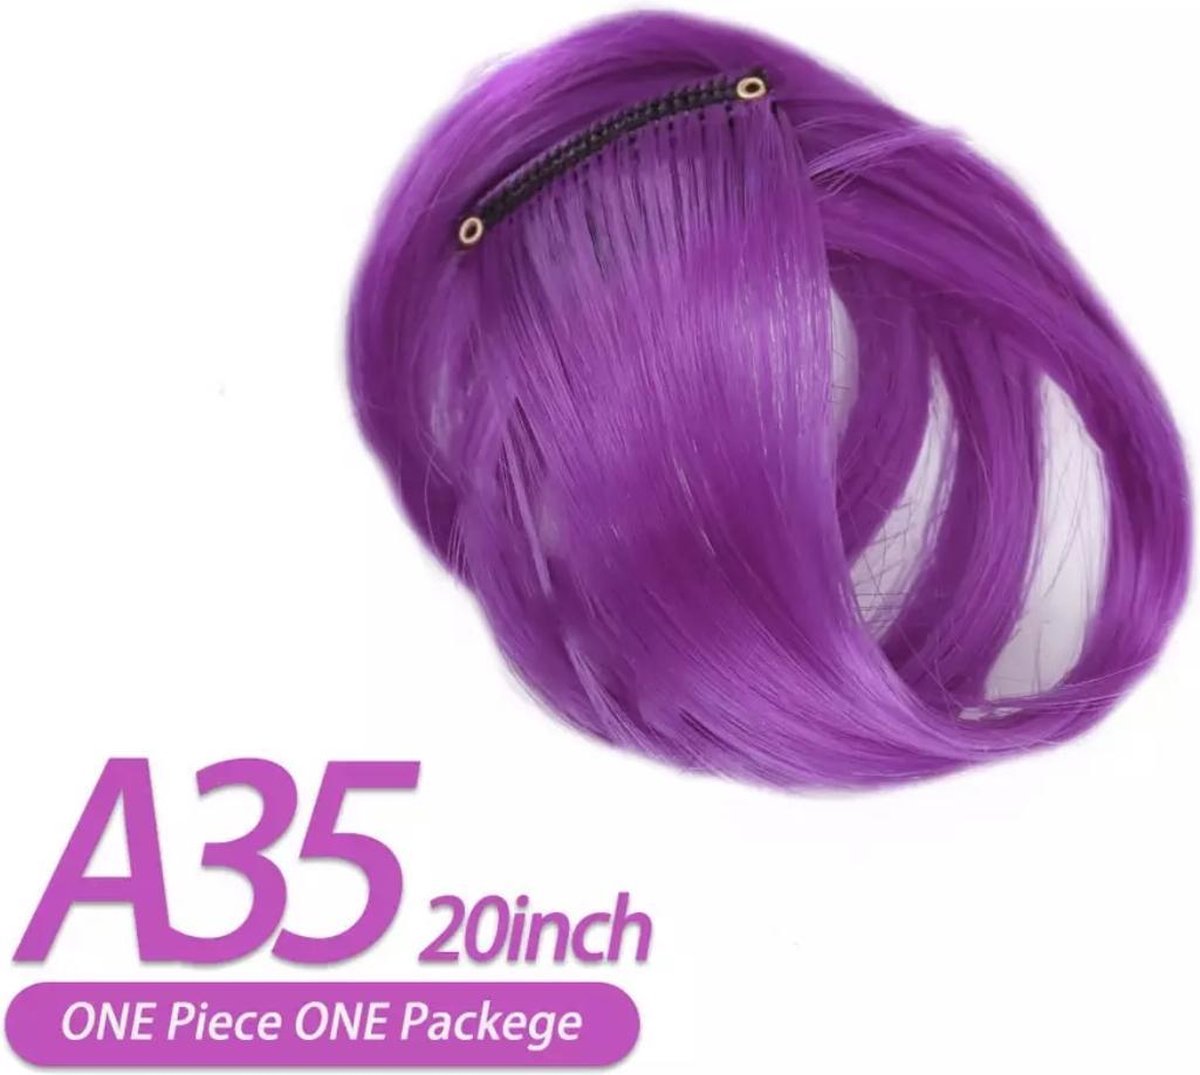 Clip in hairextension paars - plukje paars - clip in paars - plukje nep haar paars - haar extension - hairextension kind - clip in nep haar kind paars